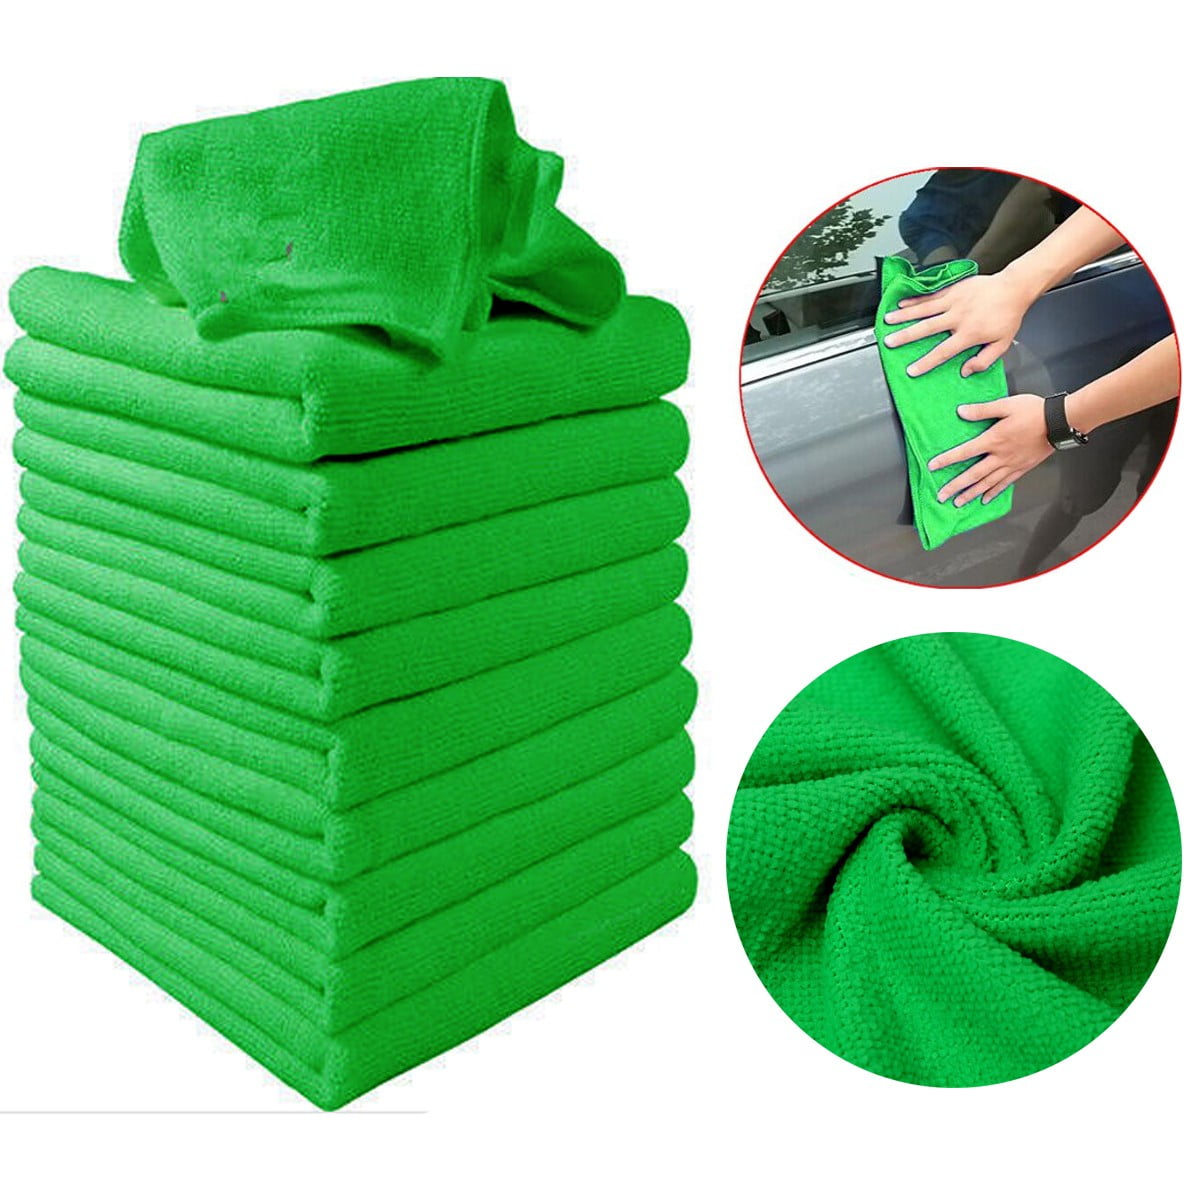 Details about   1/10Pcs Green Micro Fiber Auto Car Detailing Cleaning Towel Cloth Soft New HOT 